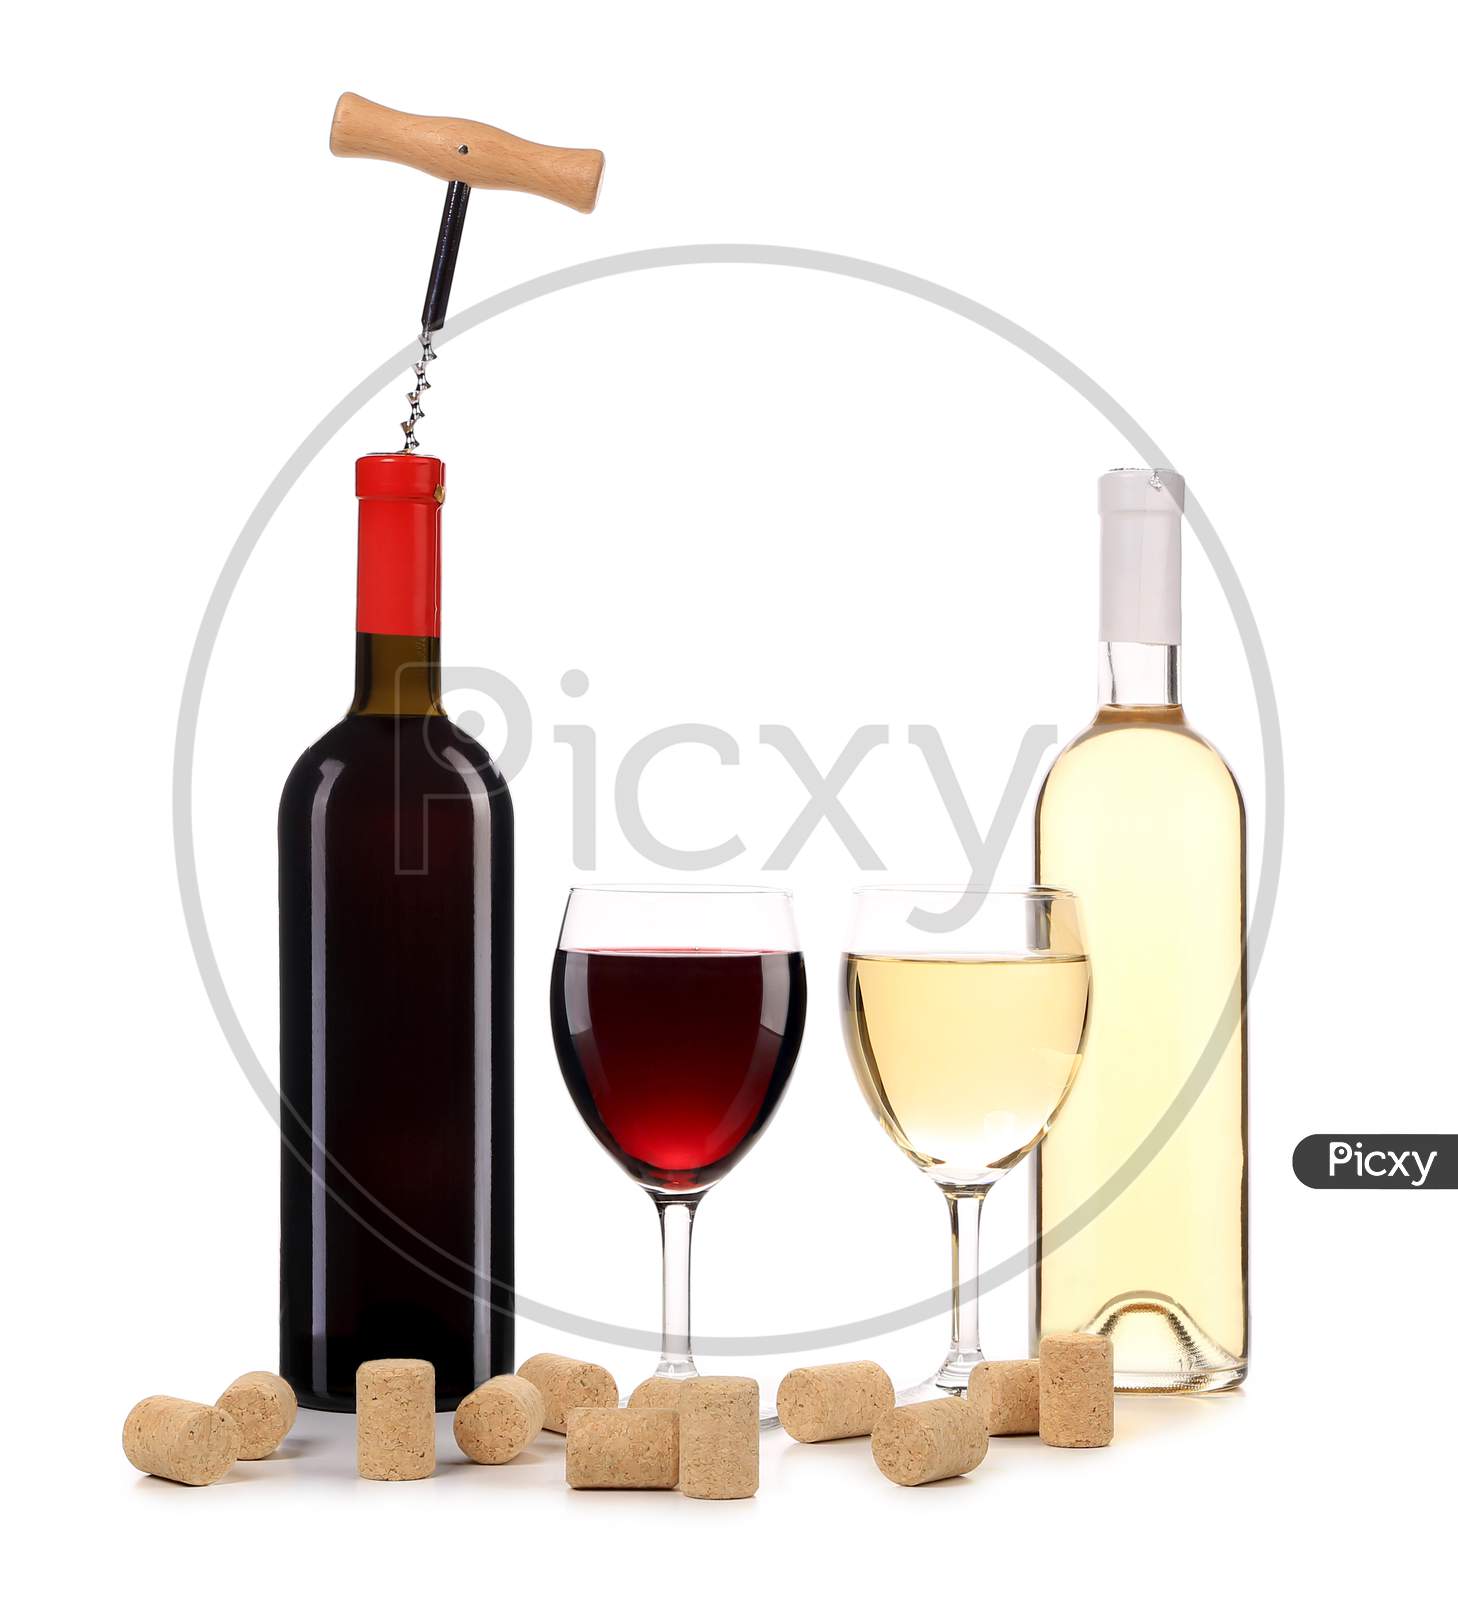 Wine Red And White Composition. Isolated On A White Background.